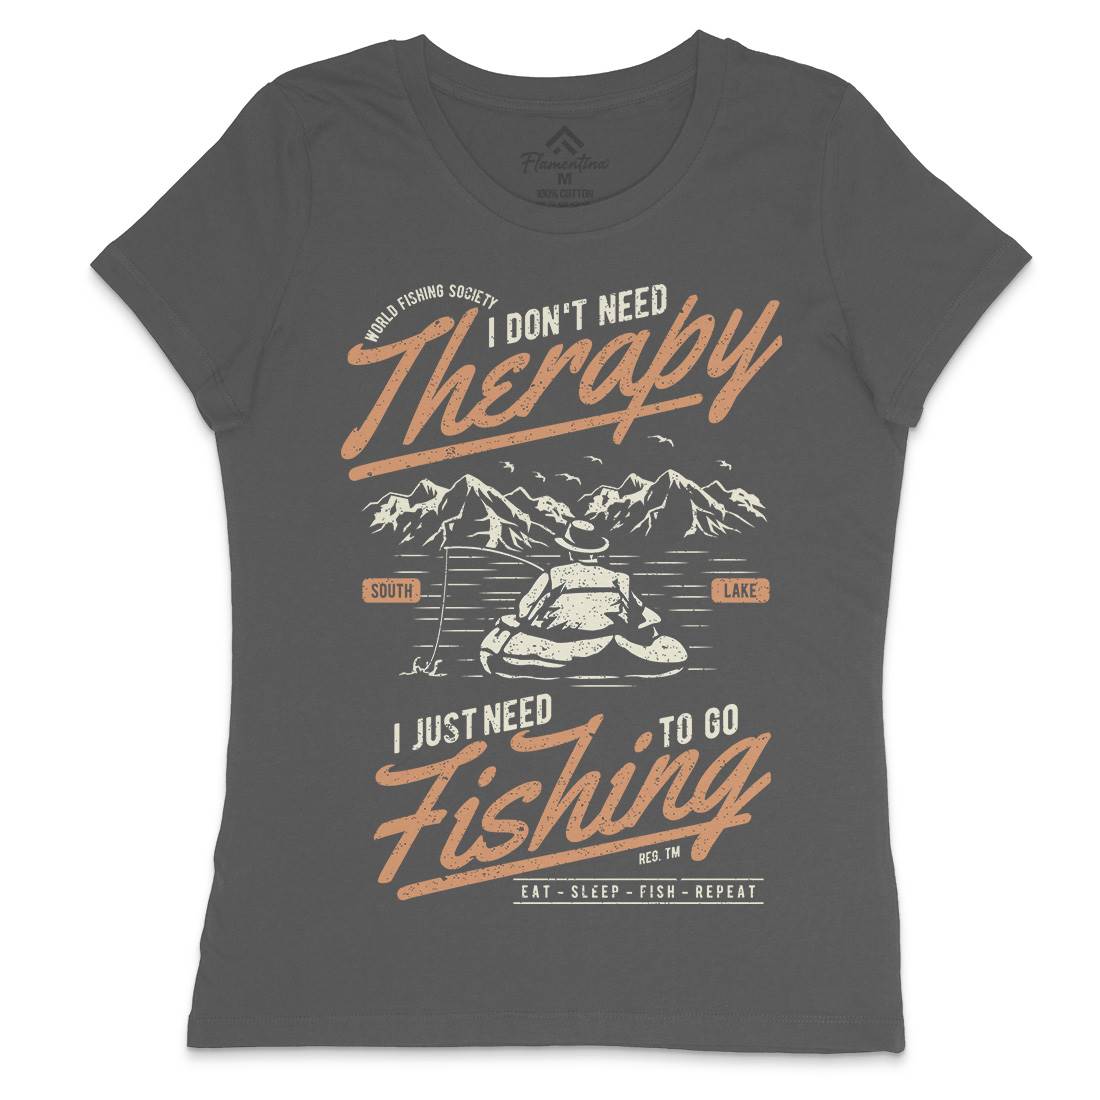 Therapy Womens Crew Neck T-Shirt Fishing A662